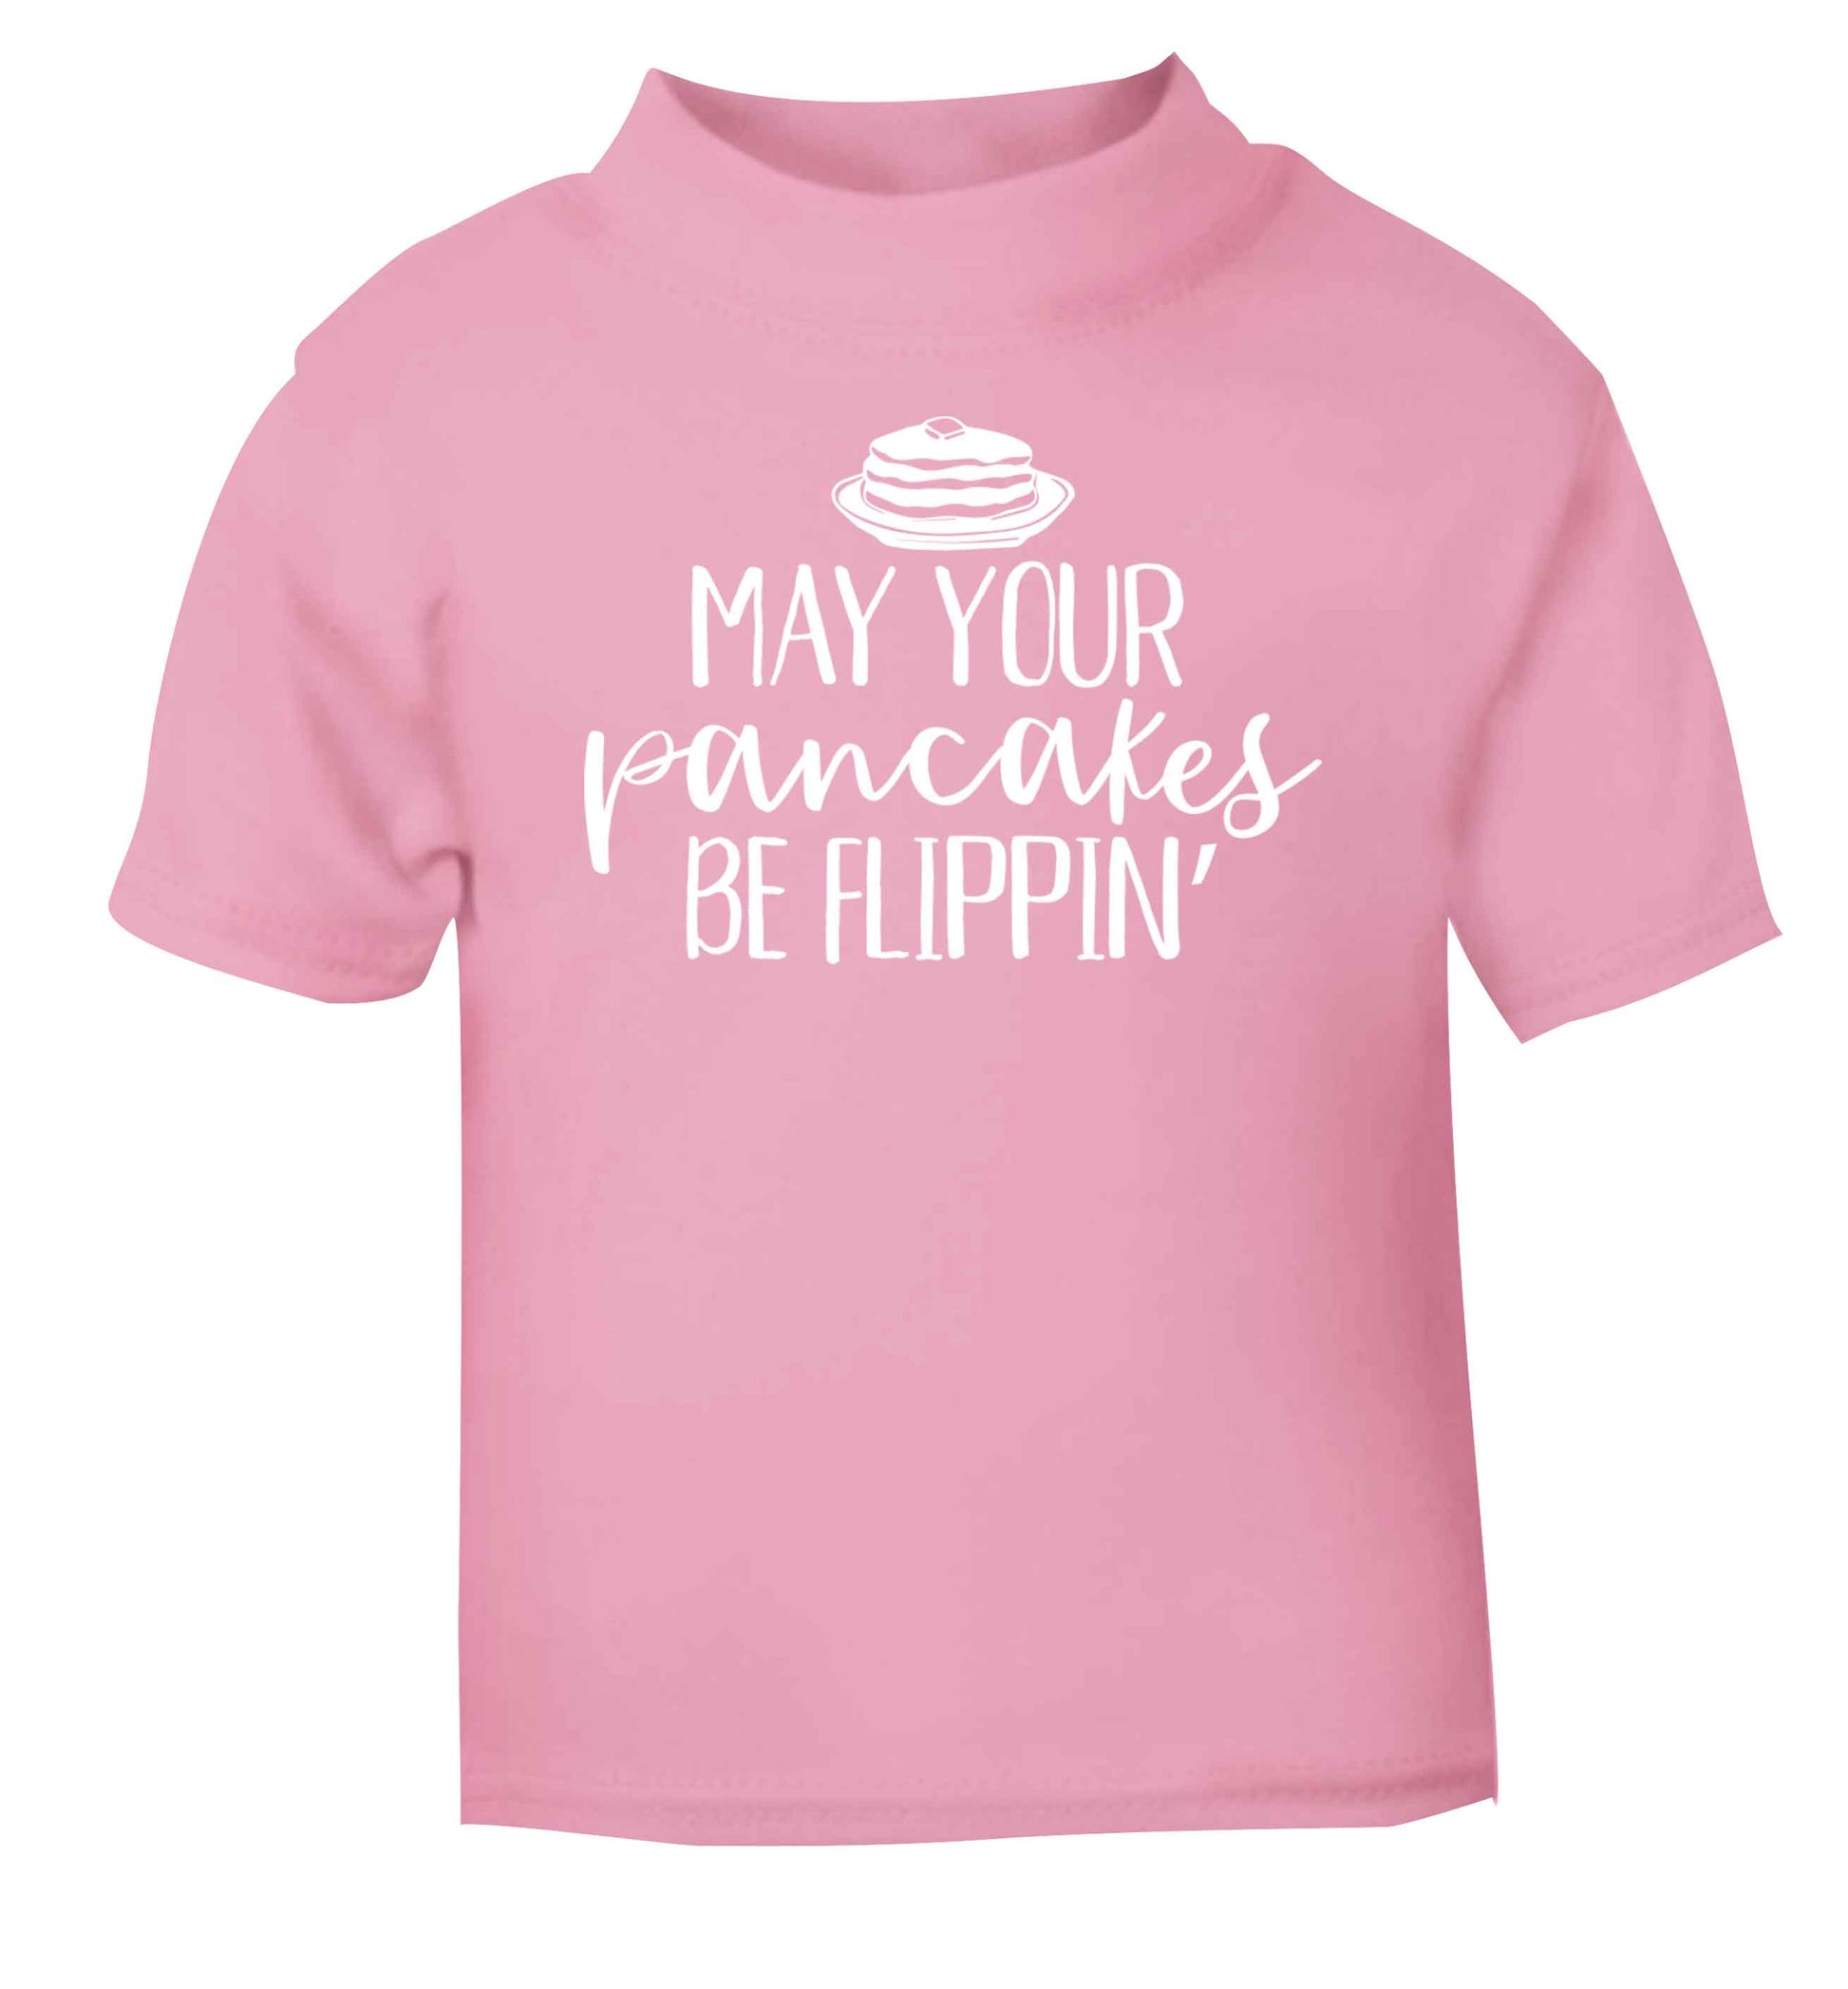 May your pancakes be flippin' light pink baby toddler Tshirt 2 Years